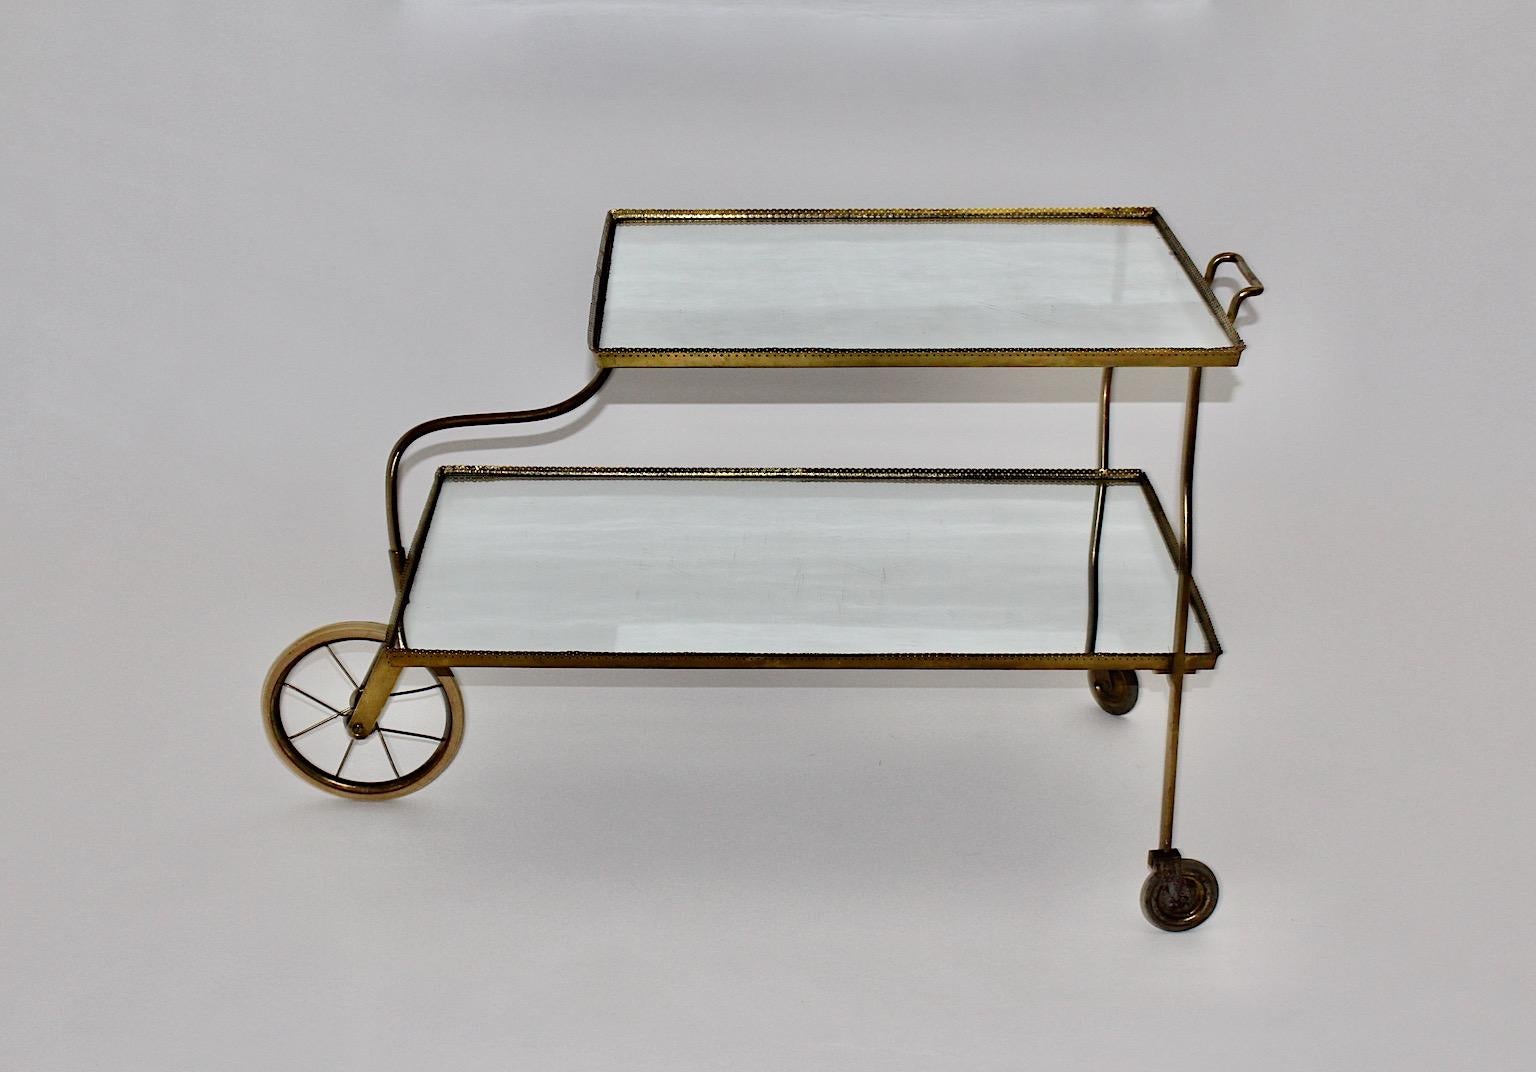 Art deco vintage bar cart model number 889 from brass and mirror glass designed by Josef Frank for Svenskt Tenn circa 1938, Sweden.
An amazing authentic bar cart from brass, perforated brass, mirror glass and three ( 3 ) rubber wheels with original